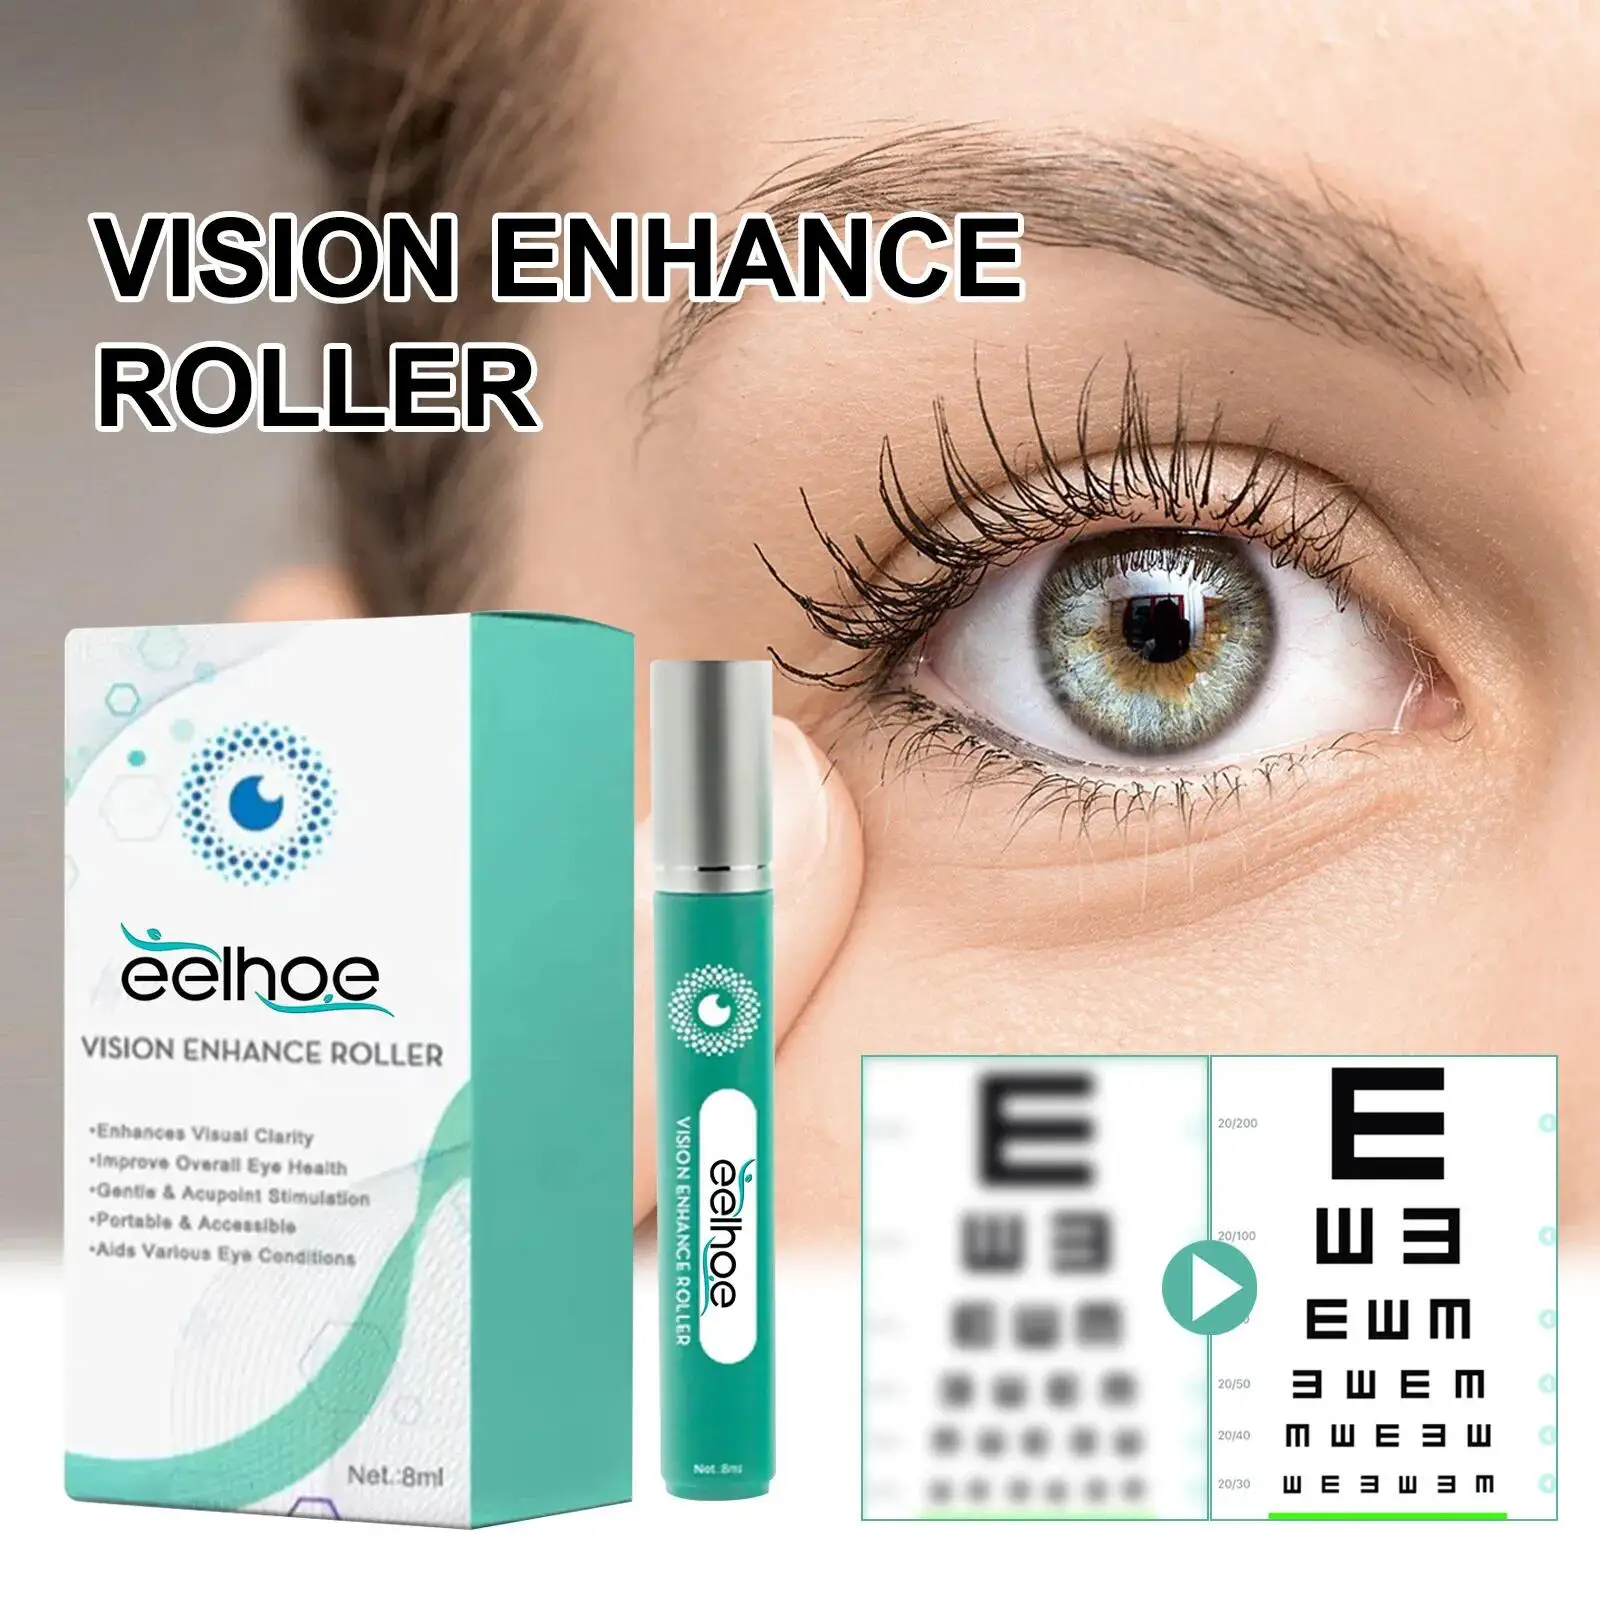 Se11cb548b4de4a6a8b86583b407ff671w Vision Enhance Roller Promotes Clearer Eyesight Mild Relax Massage Reduces Discomfort Relieve Dry Eyes Fatigue Health Eye Care